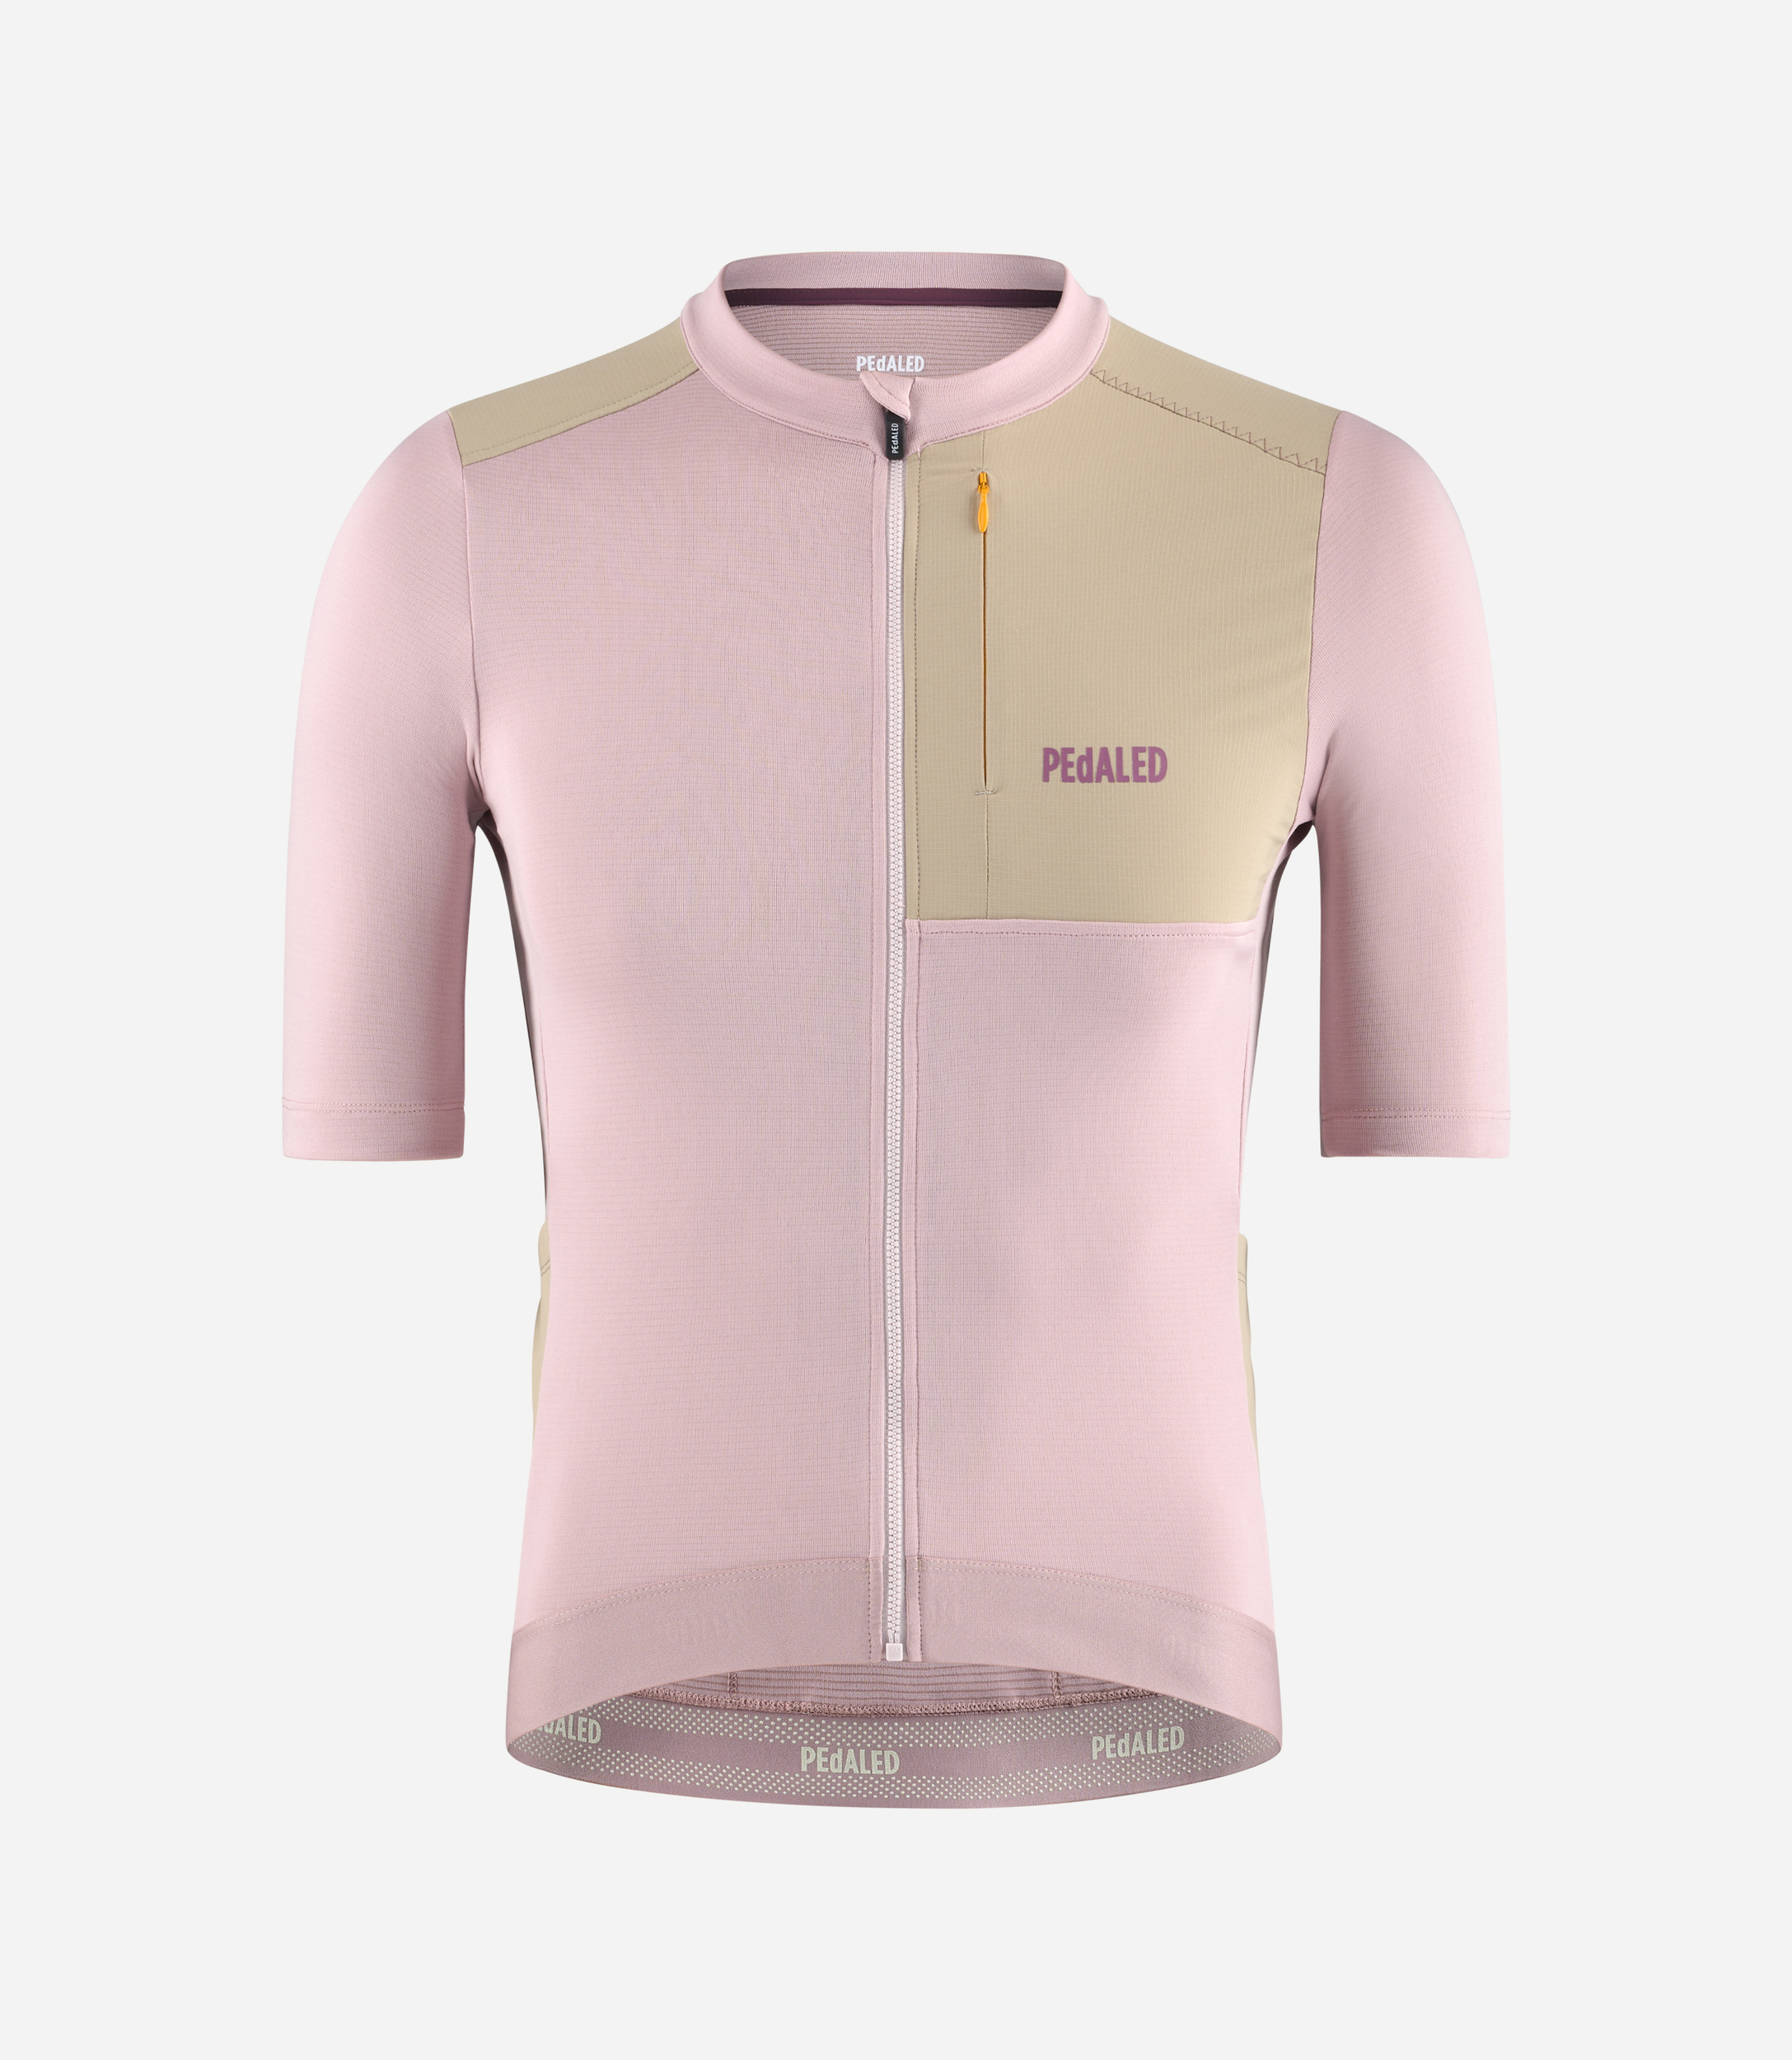 MAILLOT PEDALED ODYSSEY MERINOS TAN